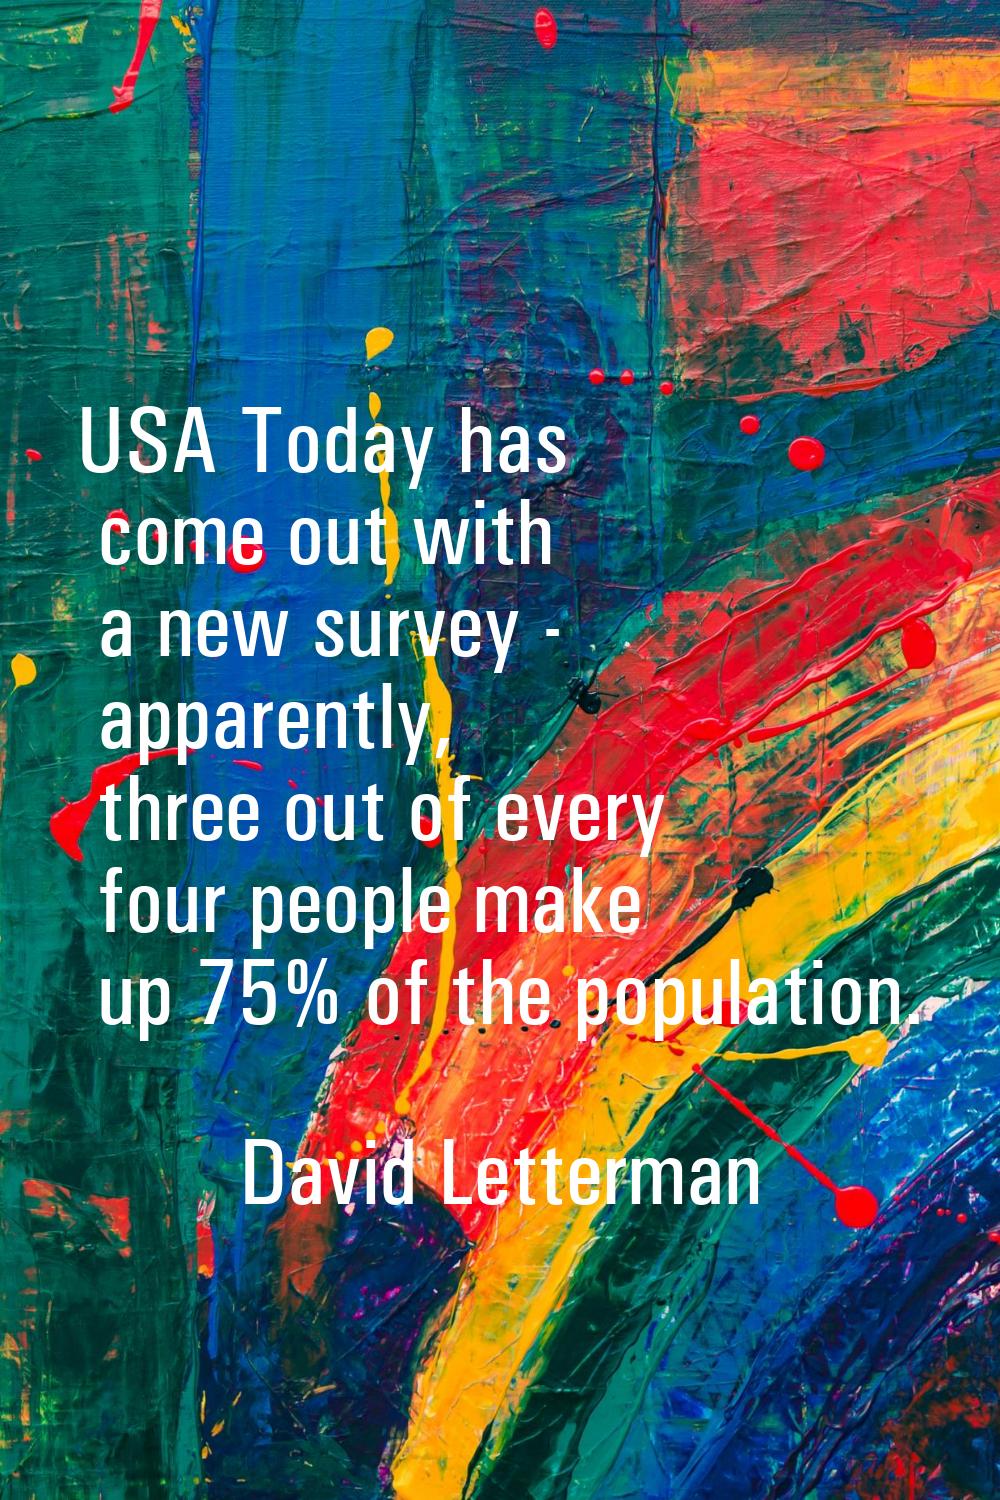 USA Today has come out with a new survey - apparently, three out of every four people make up 75% o